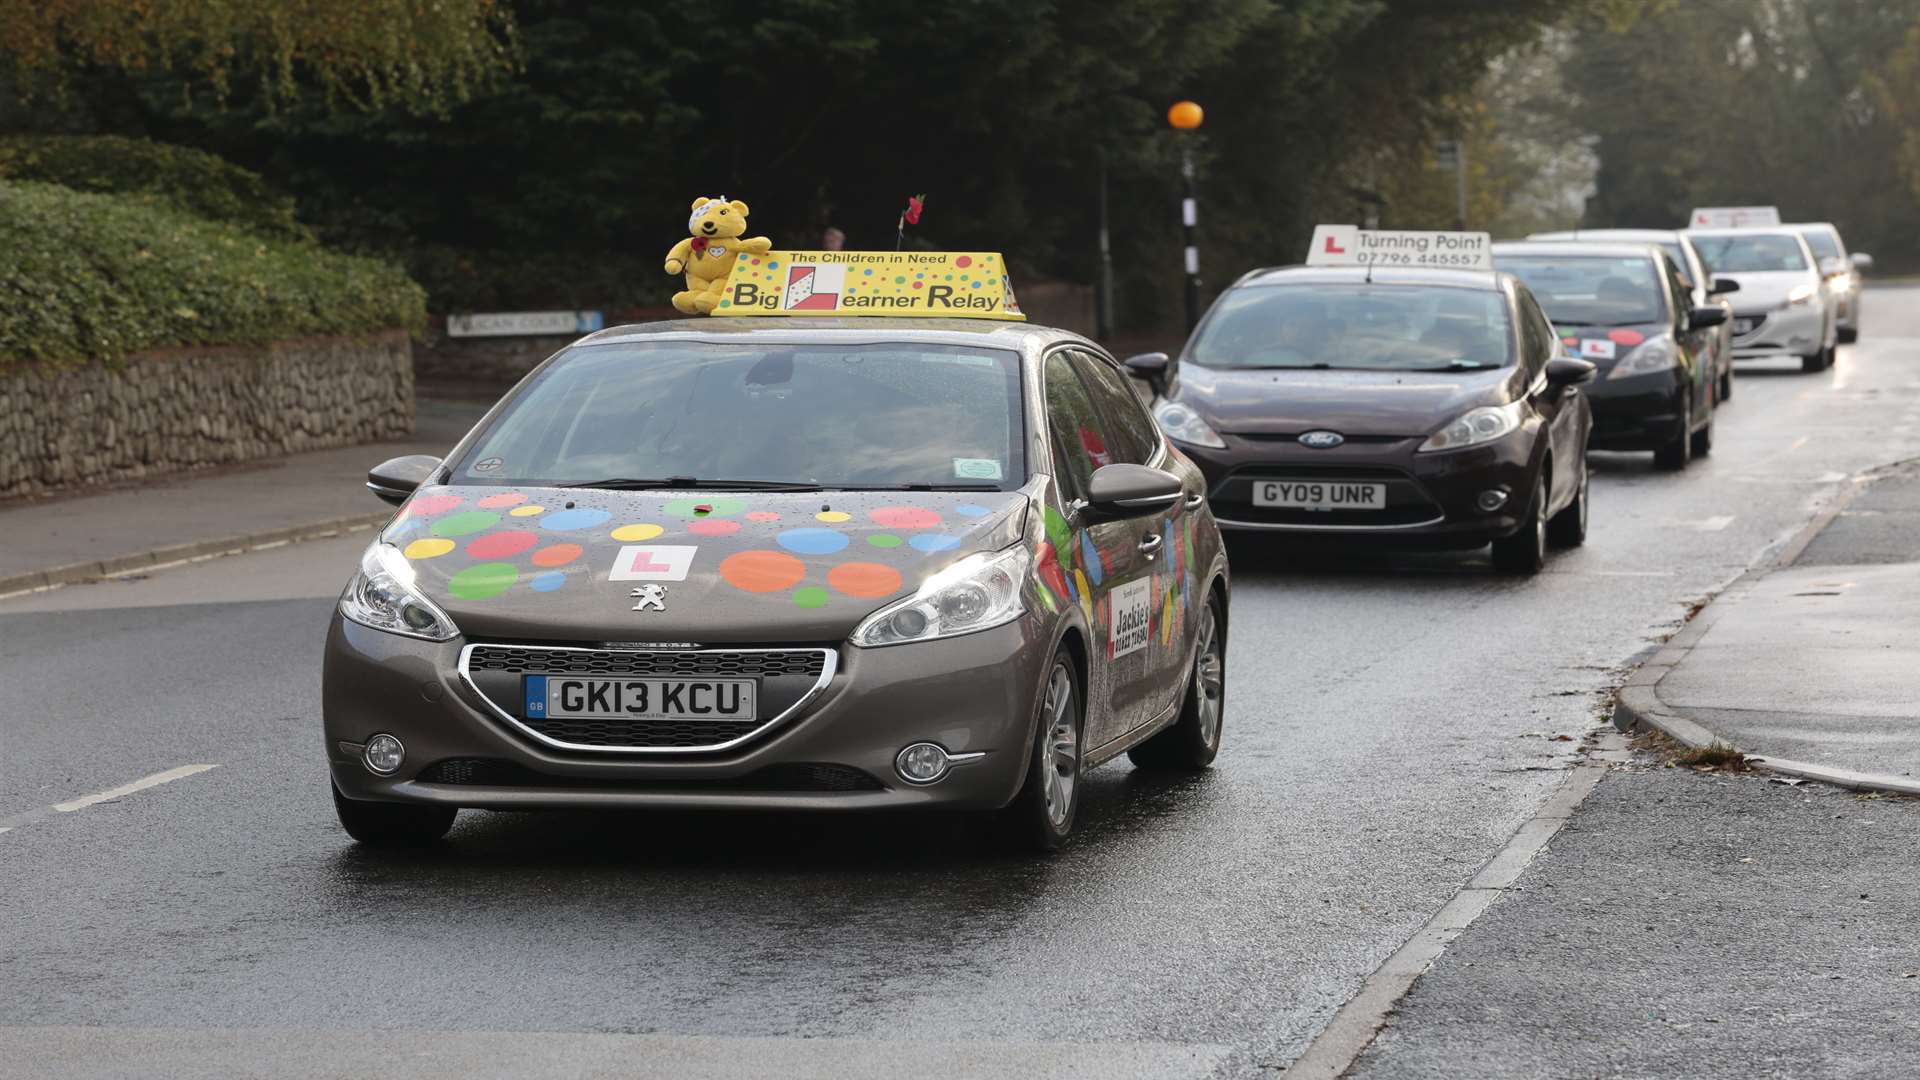 The learner cars made their way through Maidstone on the weekend